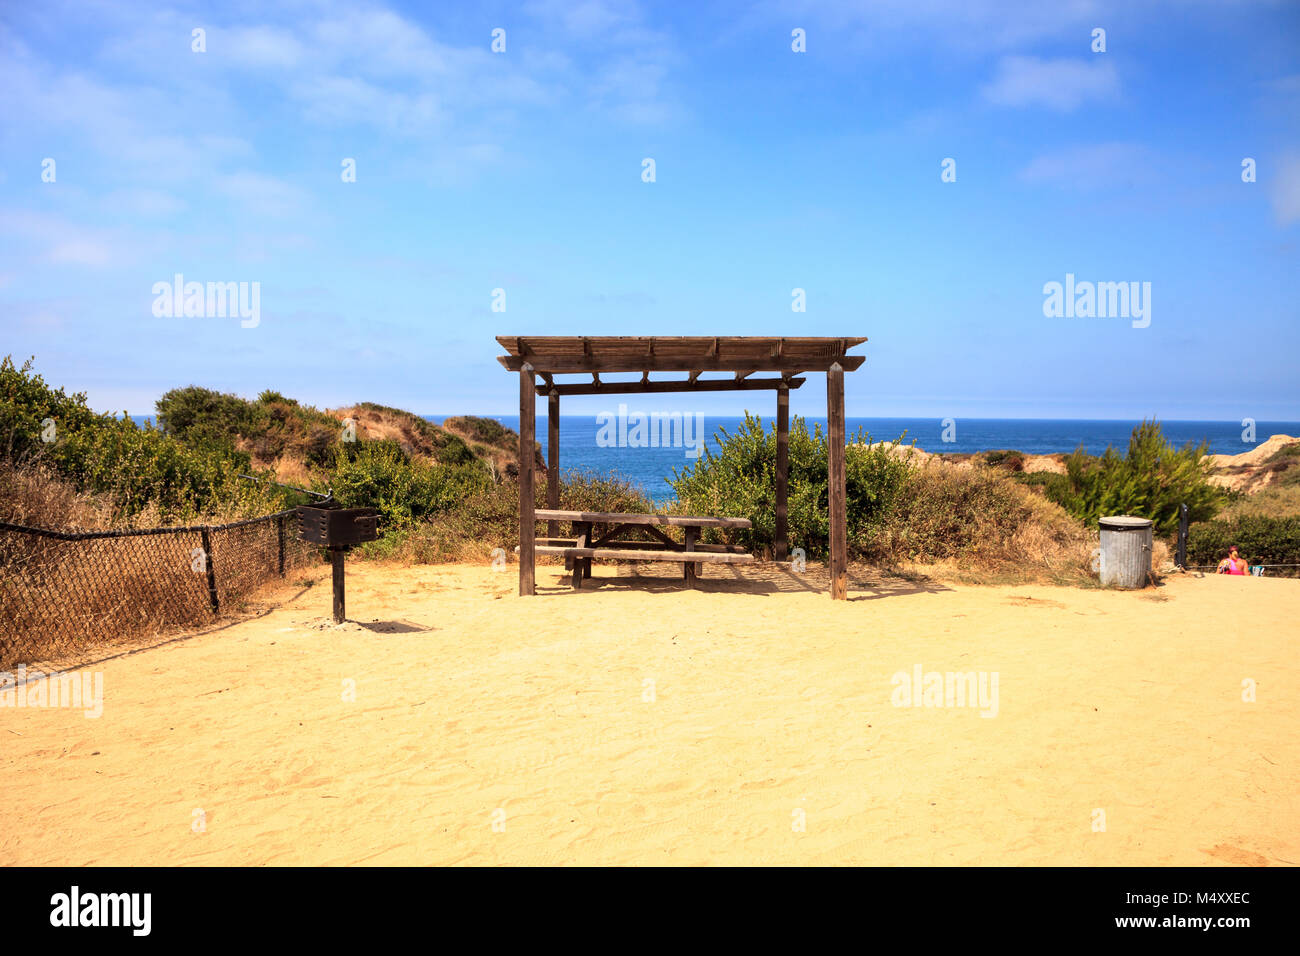 Picnic table and BBQ grill at San Clemente State Beach Stock Photo